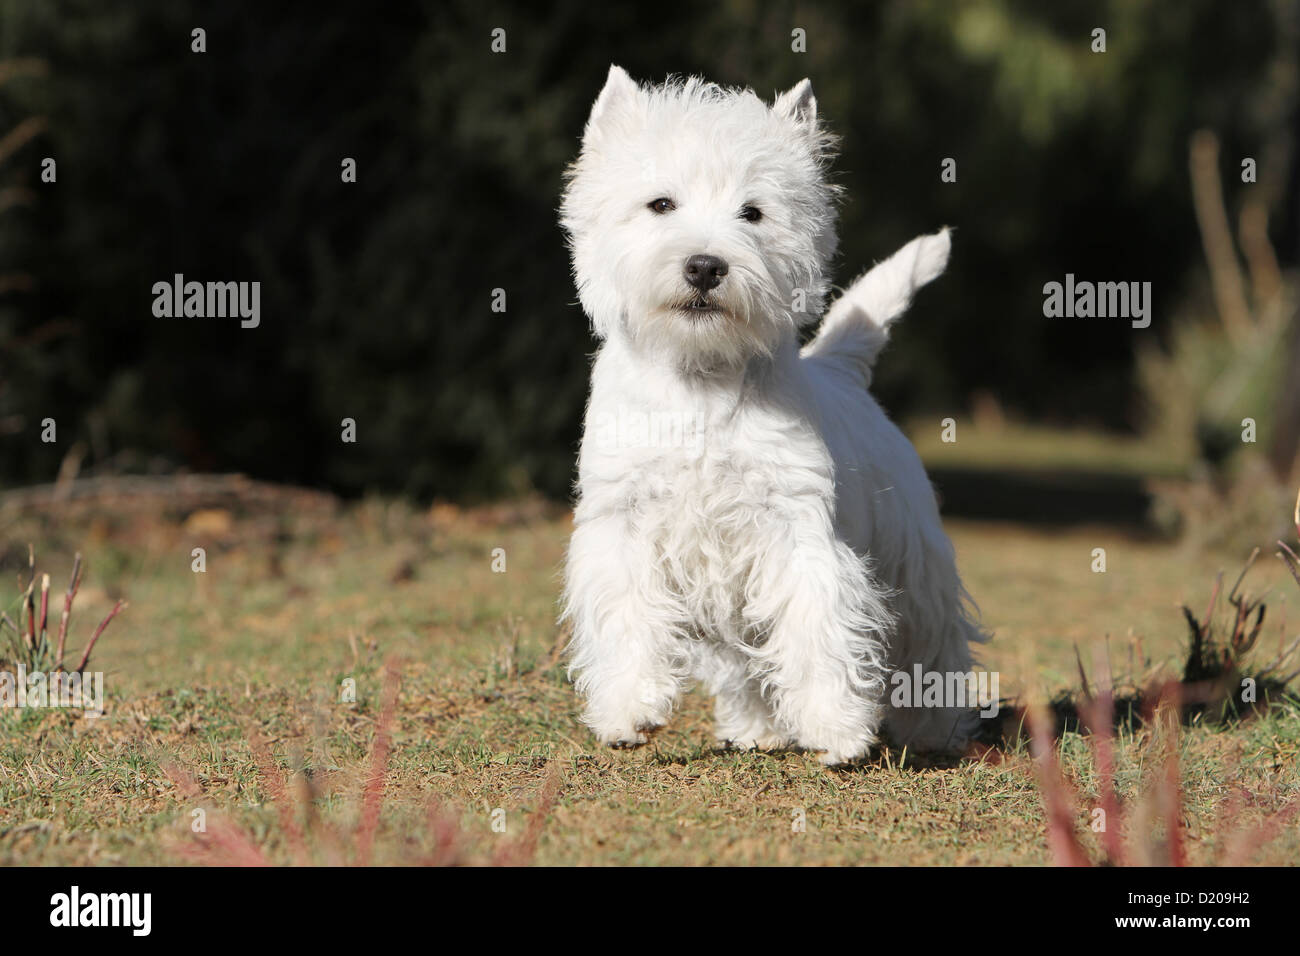 Dog West Highland White Terrier / Westie adult standing face Stock Photo